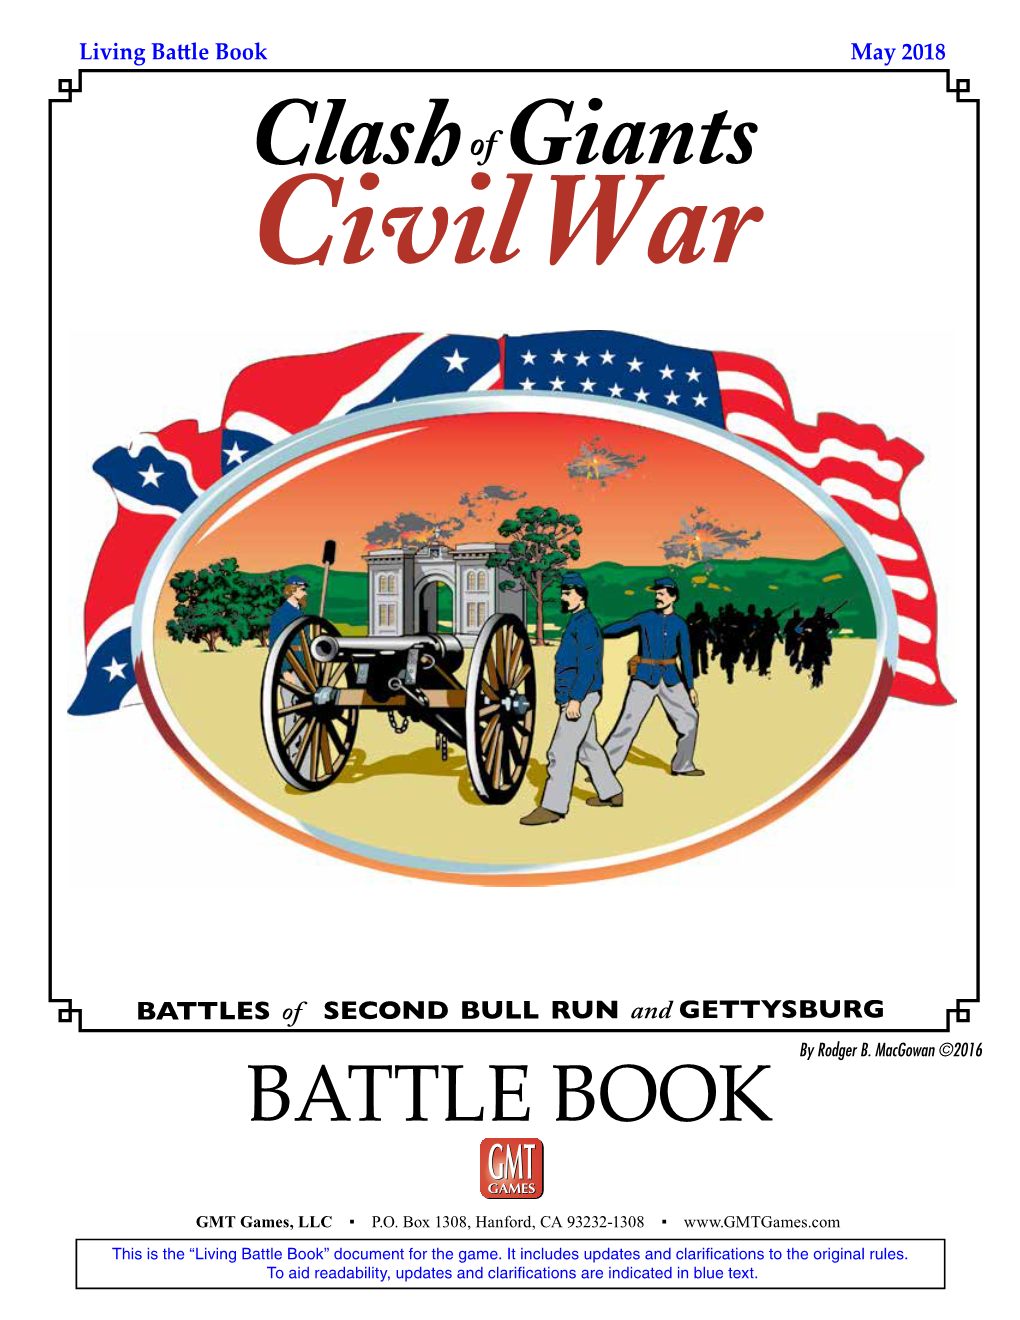 Battle Book May 2018